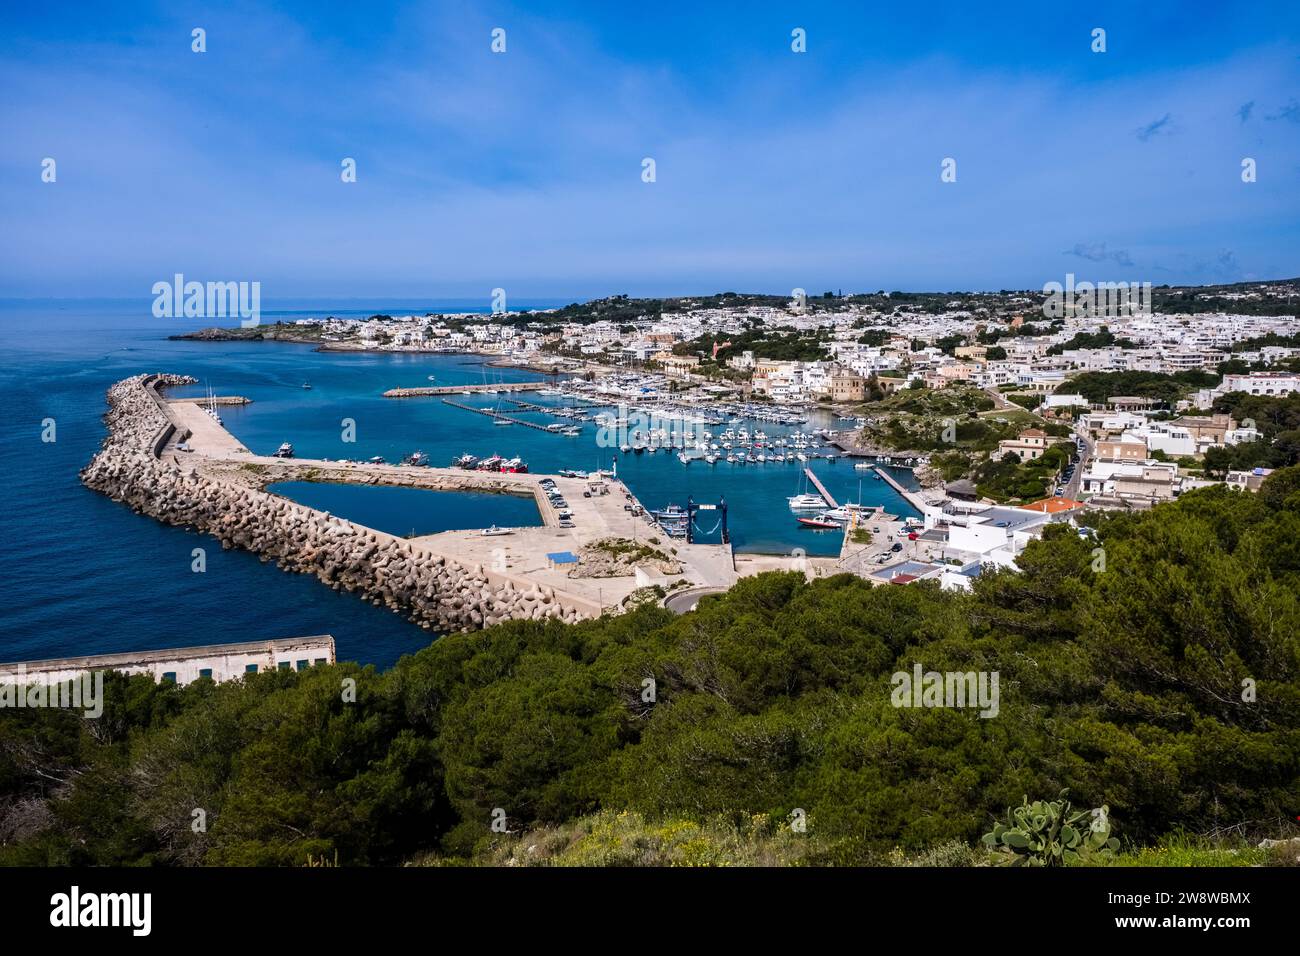 Aerial view on harbour and town of the small town of Santa Maria di Leuca. Stock Photo